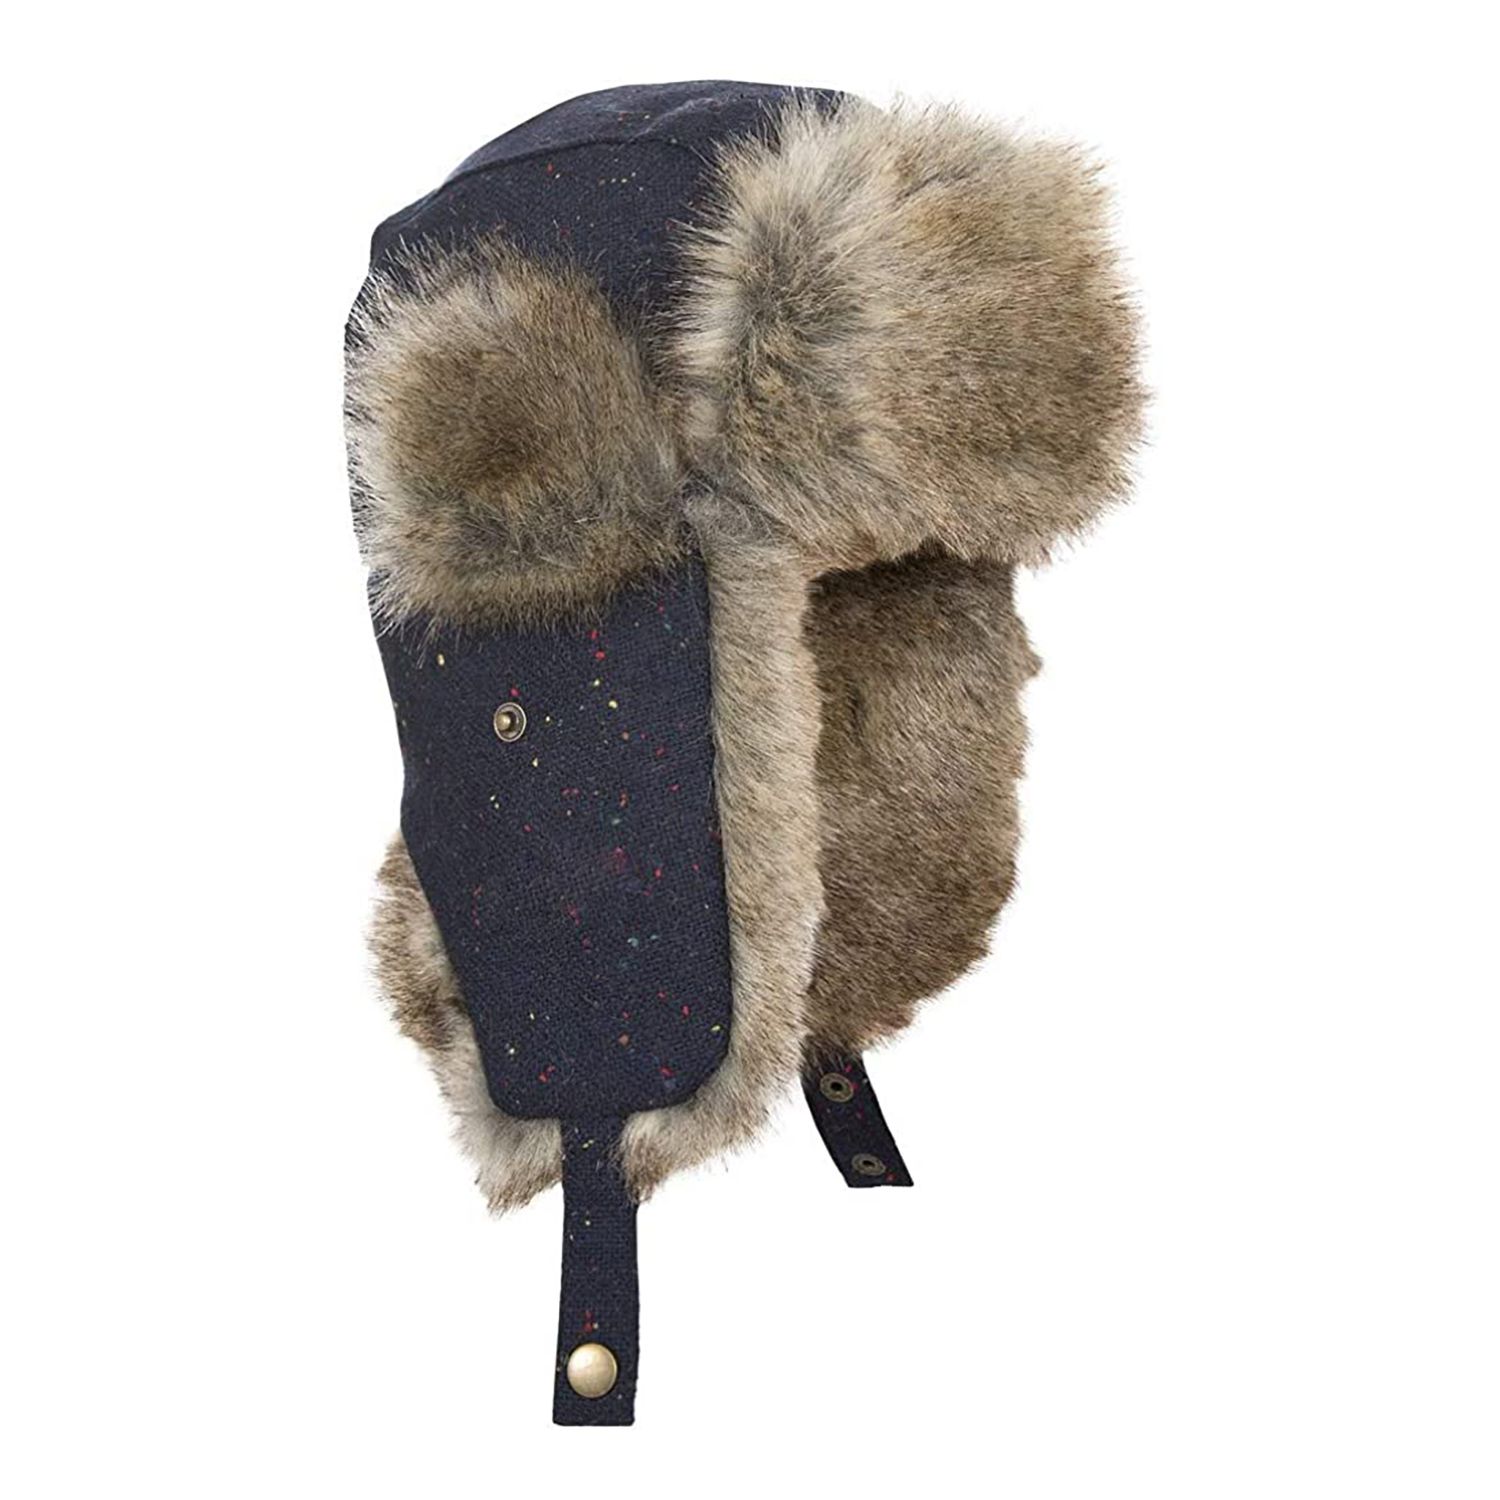 Trapper hat. Adjustable fastening. Faux fur trim and lining. Leatherette badge. Outer: 100% Polyester, Lining: 100% Acrylic artificial fur.